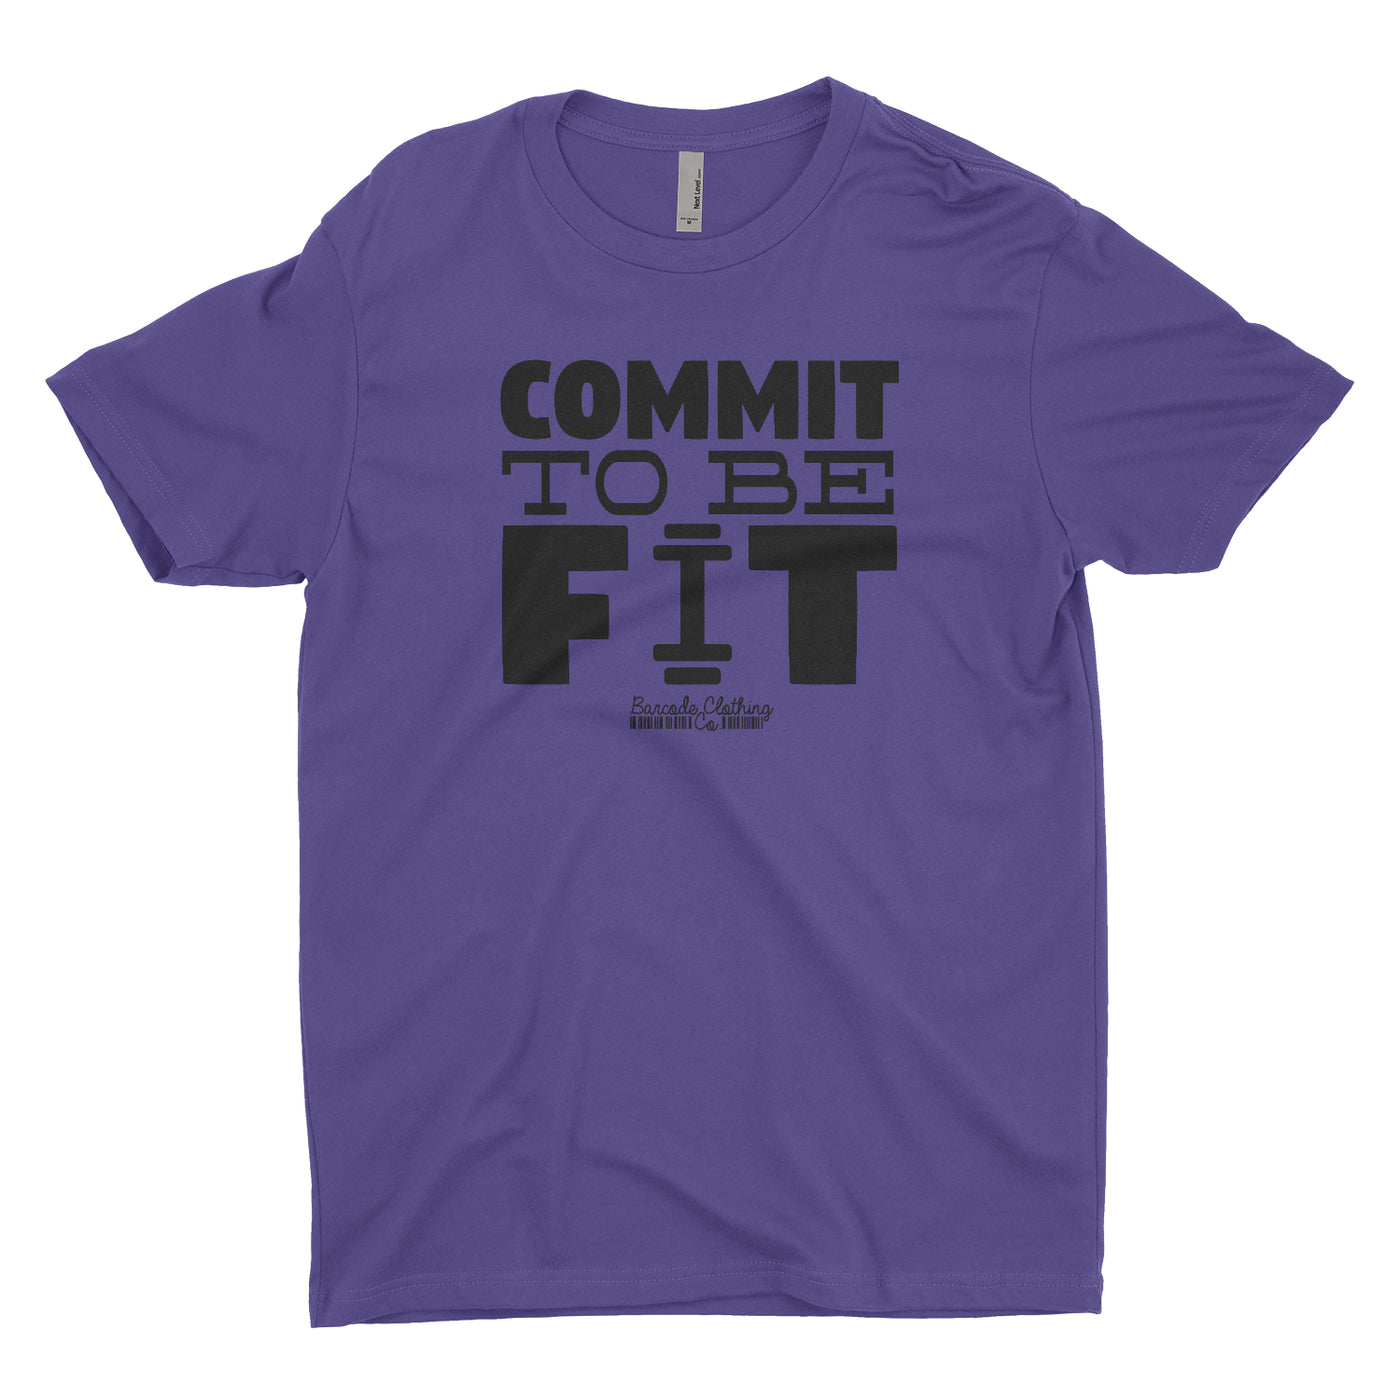 Commit To Be Fit Blacked Out